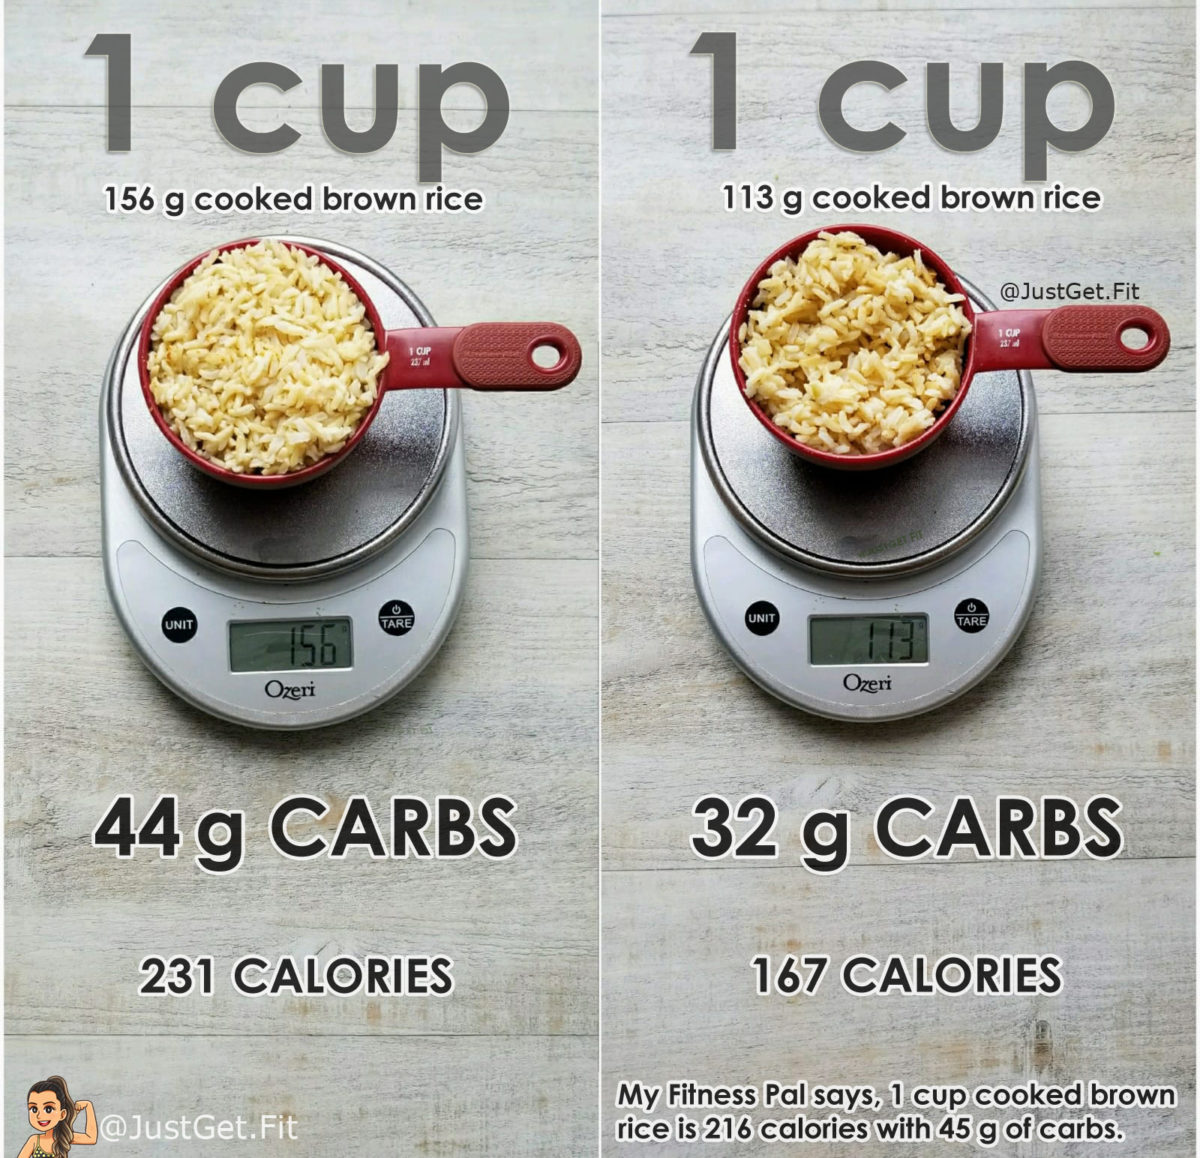 Food scale vs measuring cup for weighing food